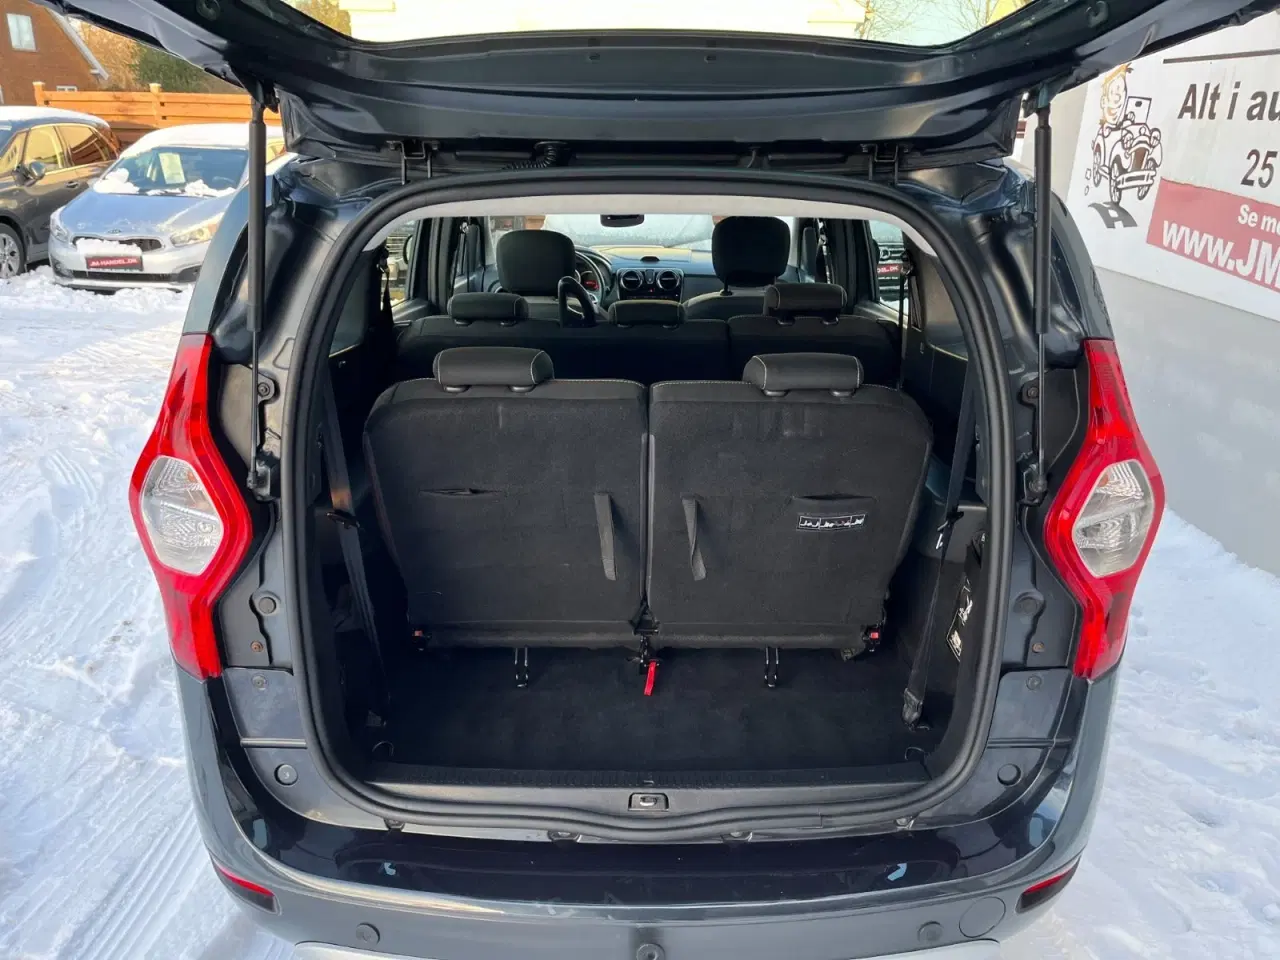 Billede 11 - Dacia Lodgy 1,5 dCi 90 Family Edition 7prs